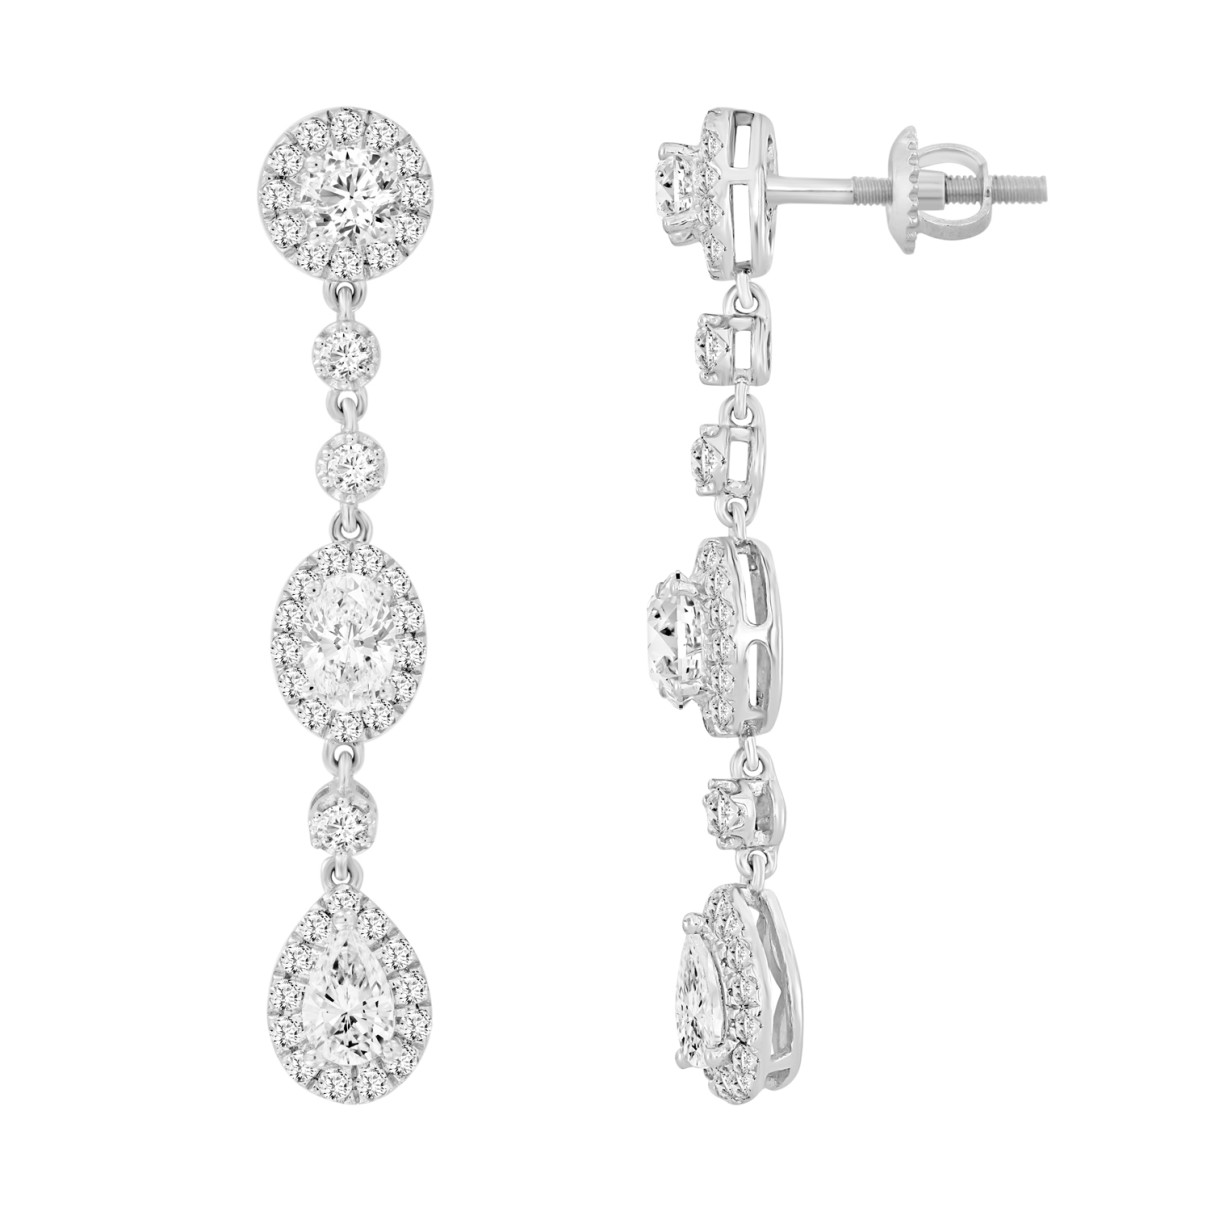 LADIES LINEAR EARRINGS 3 1/2CT OVAL/ROUND/PEAR DIAMOND 14K WHITE GOLD